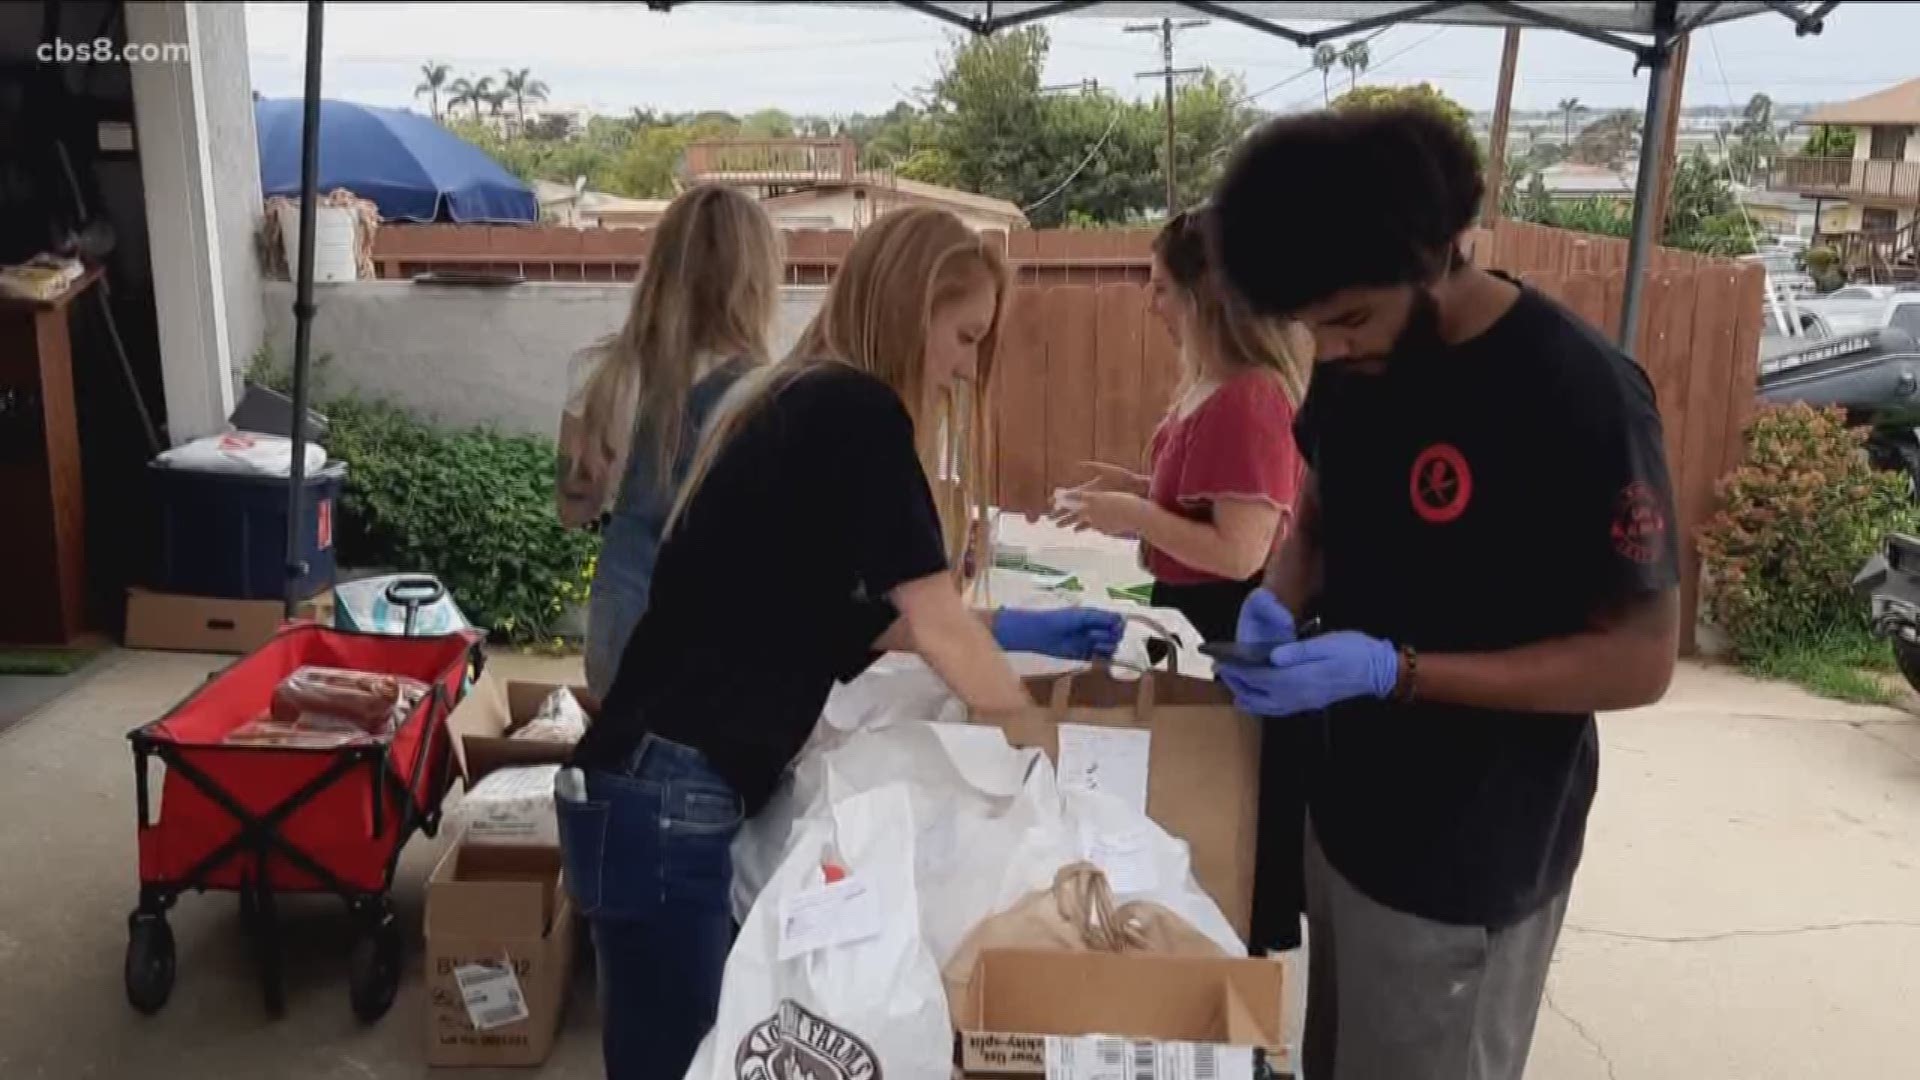 Neighbors are coming together in San Diego to deliver free groceries to seniors.